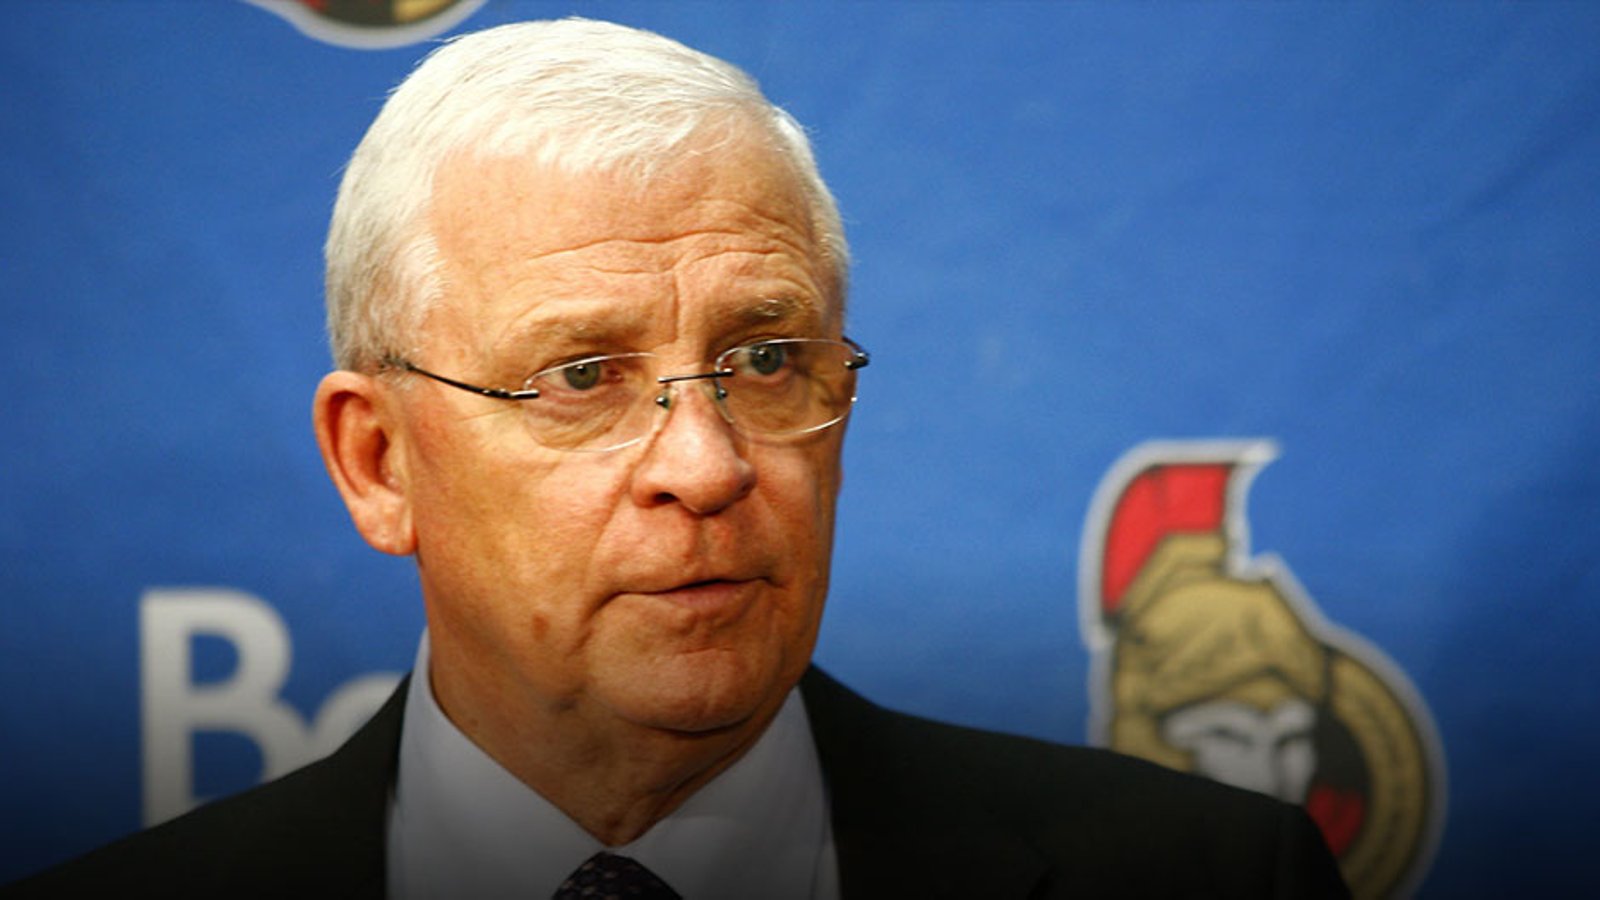 The hockey world reacts to the death of former NHL coach and GM Bryan Murray